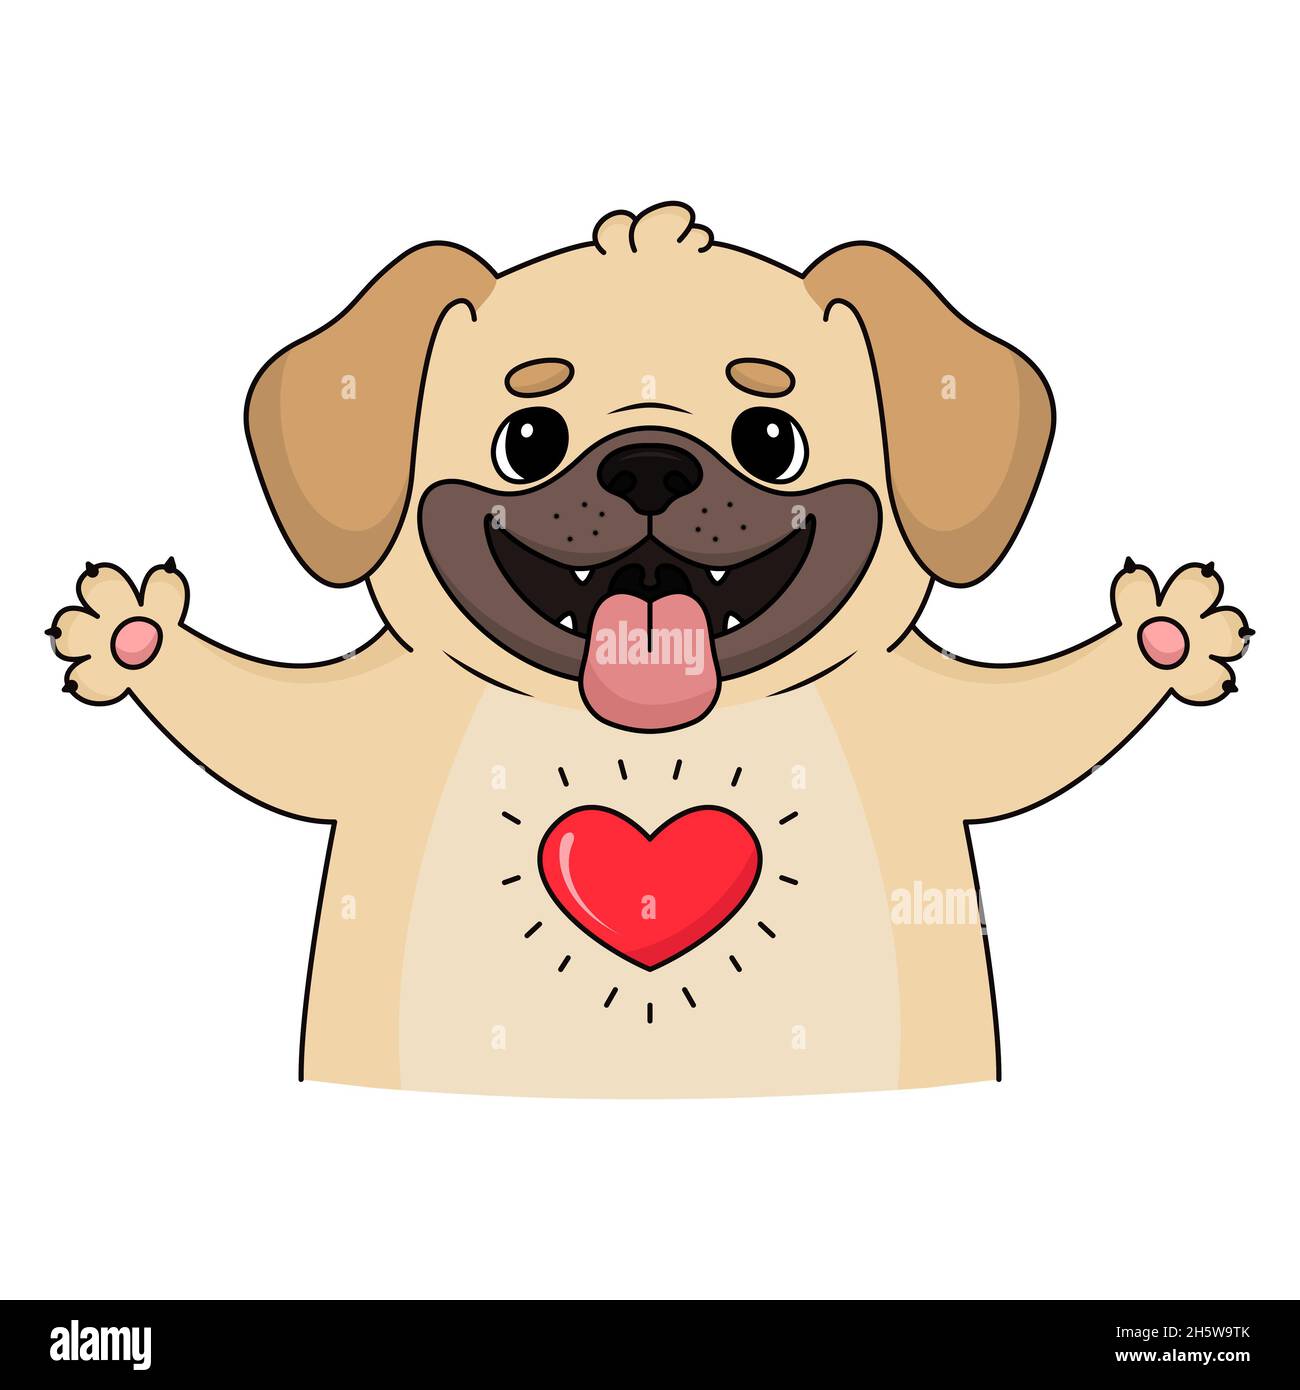 Illustration of a beautiful fawn Puggle giving you a warm welcoming hug with a big red heart showing their love for you. Stock Photo